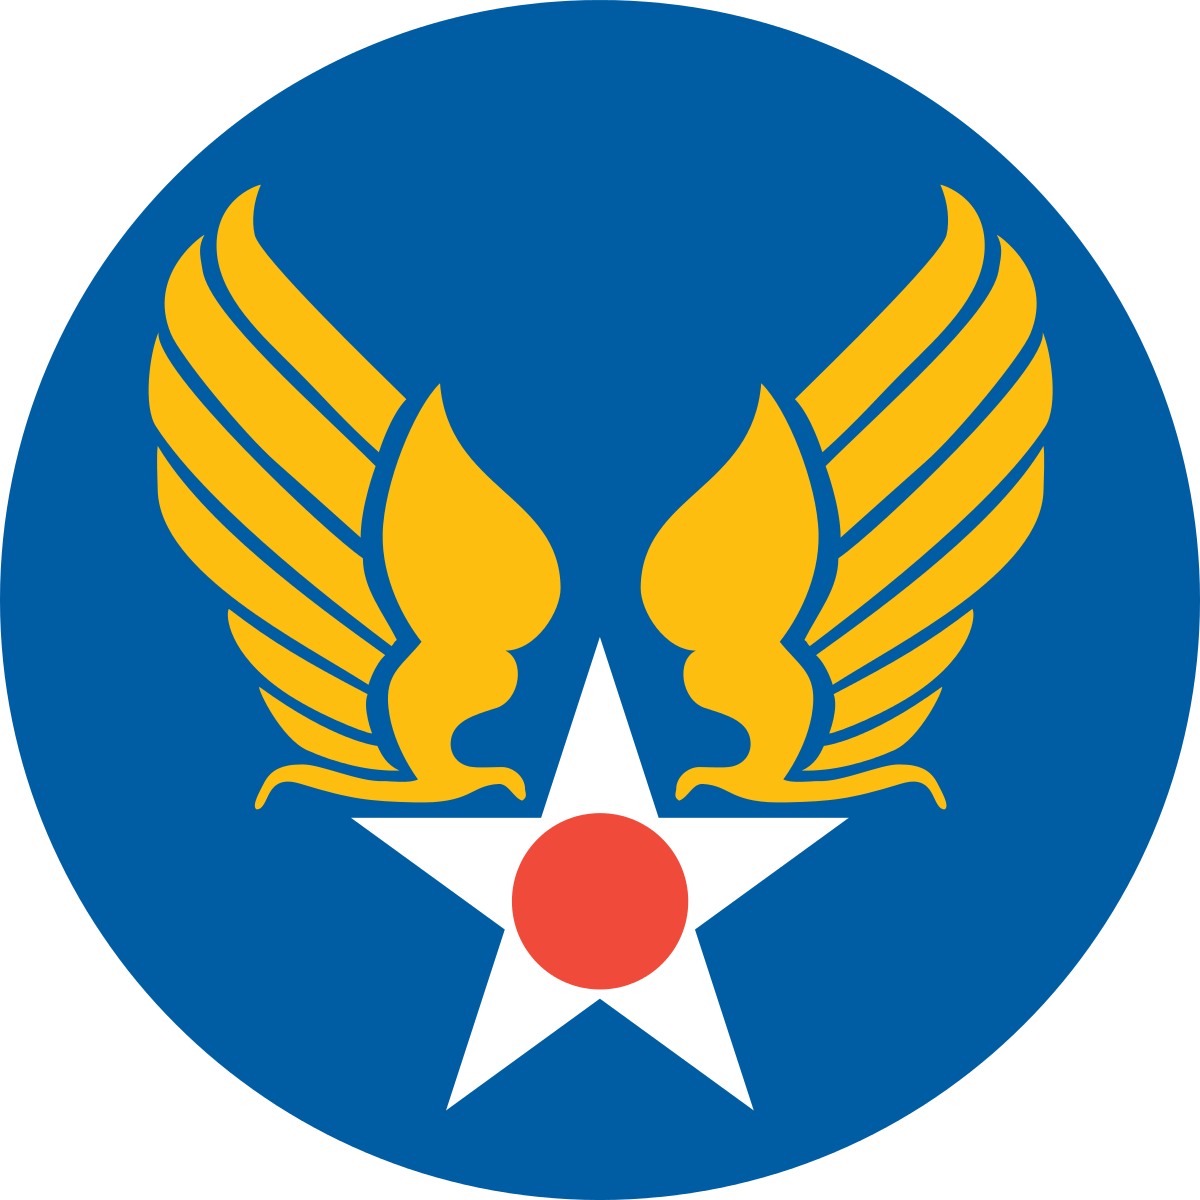 Dept of the Air Force Logo - United States Army Air Forces